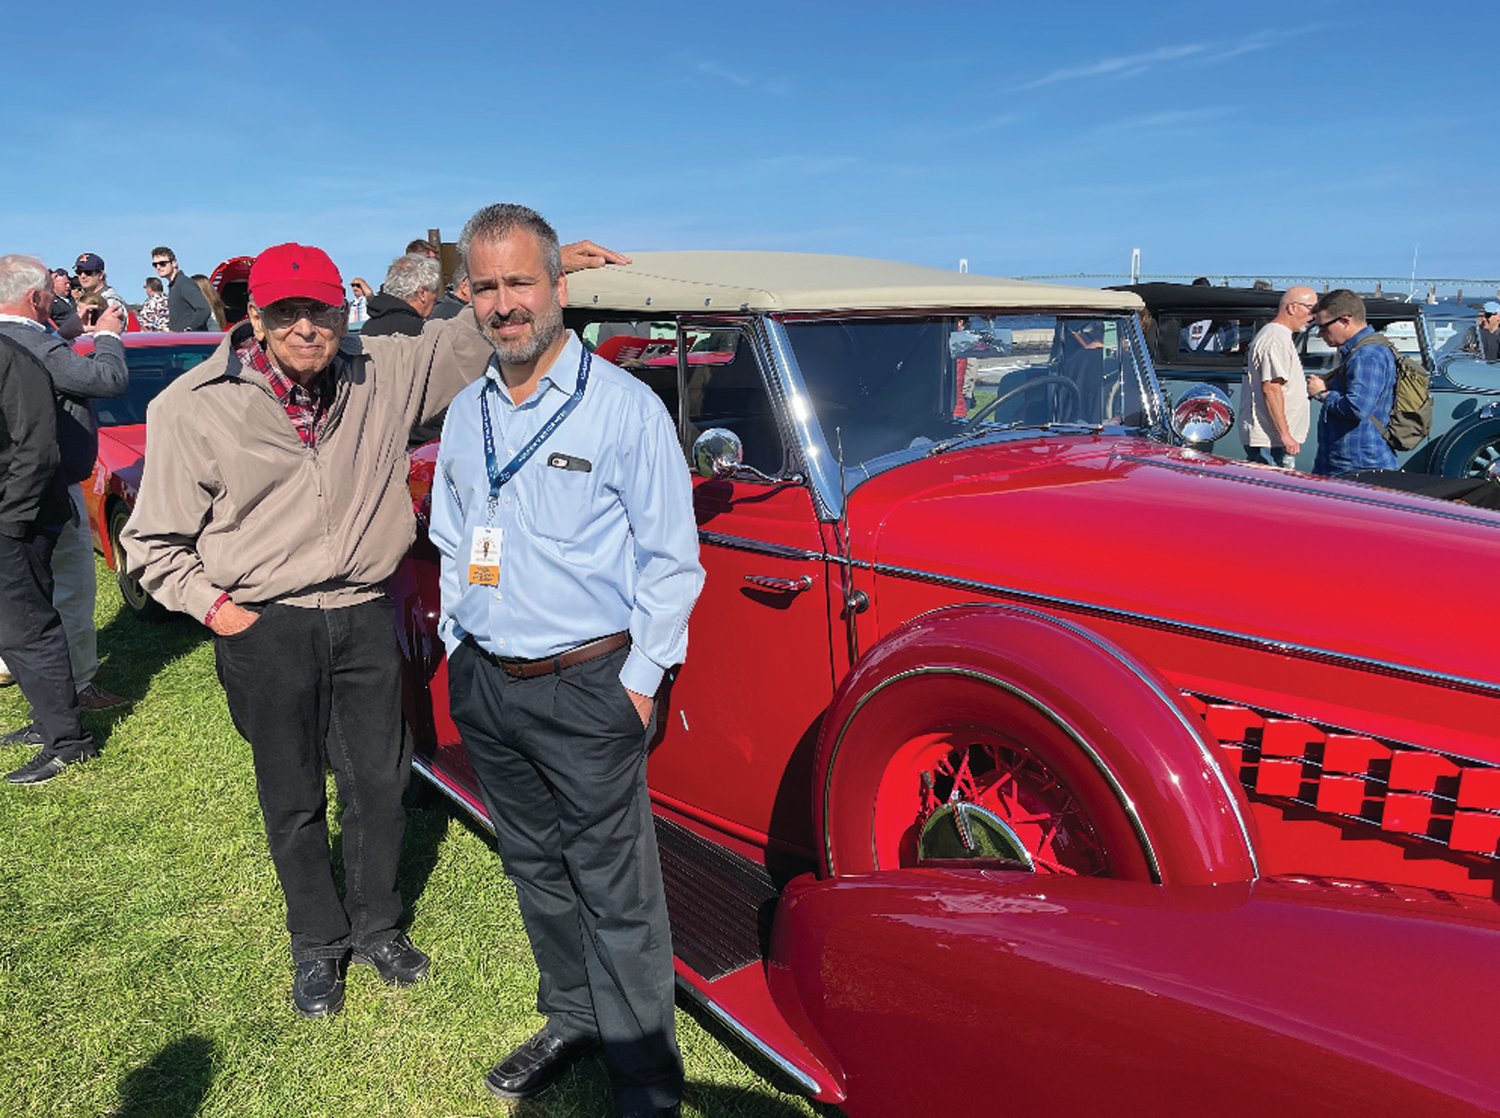 SHOW STOPPER: John Ricci drove his 1934 Cadillac to Fort Adams on Saturday, Oct. 2, where he lined up with other classic automobiles prior to a parade that ended on Bellevue Avenue in Newport.